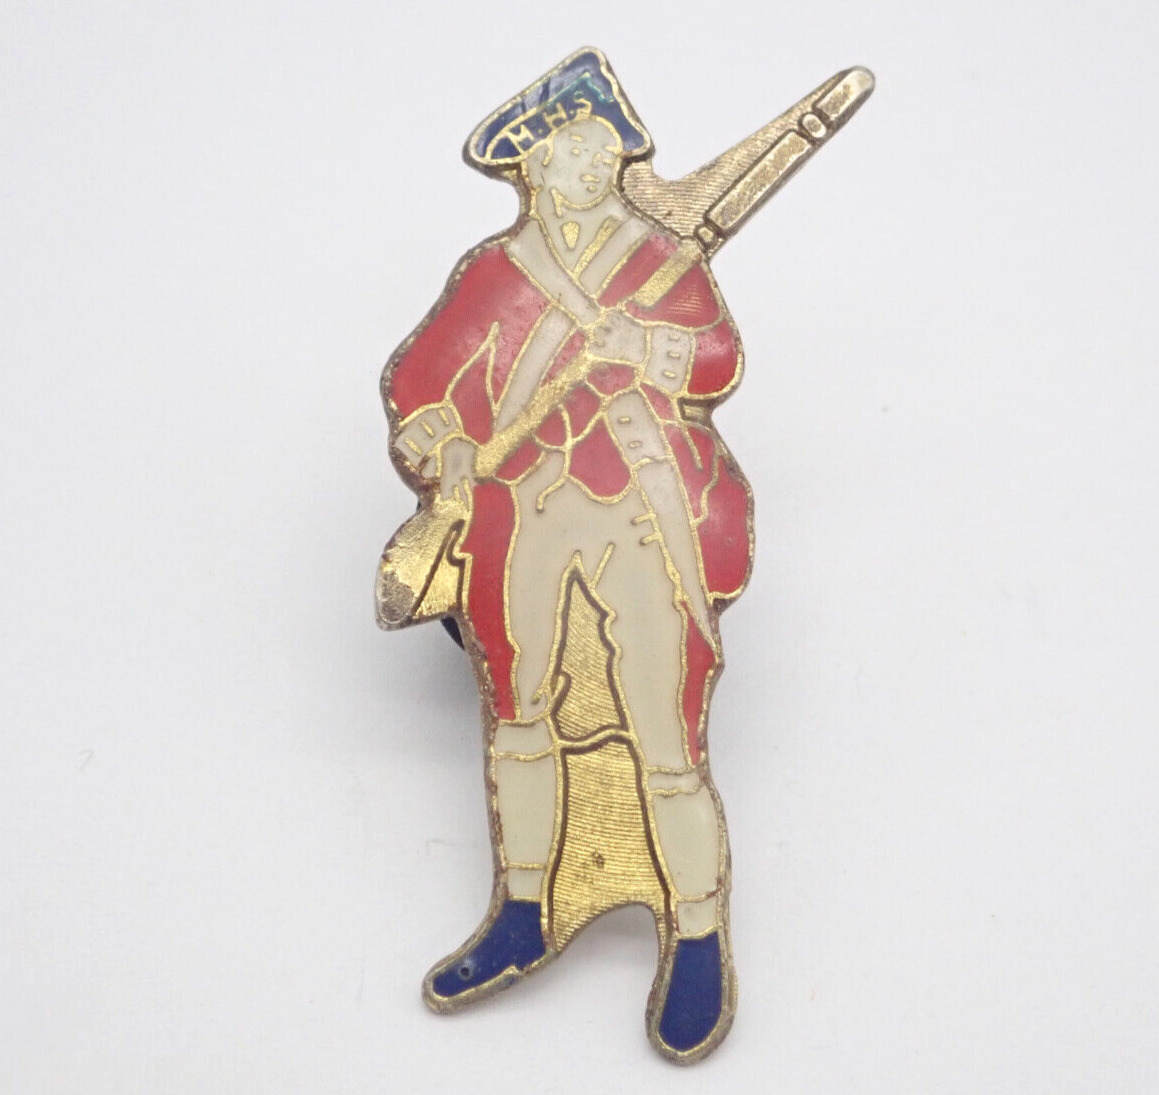 Red Coat Colonial British Soldier Vintage Lapel Pin